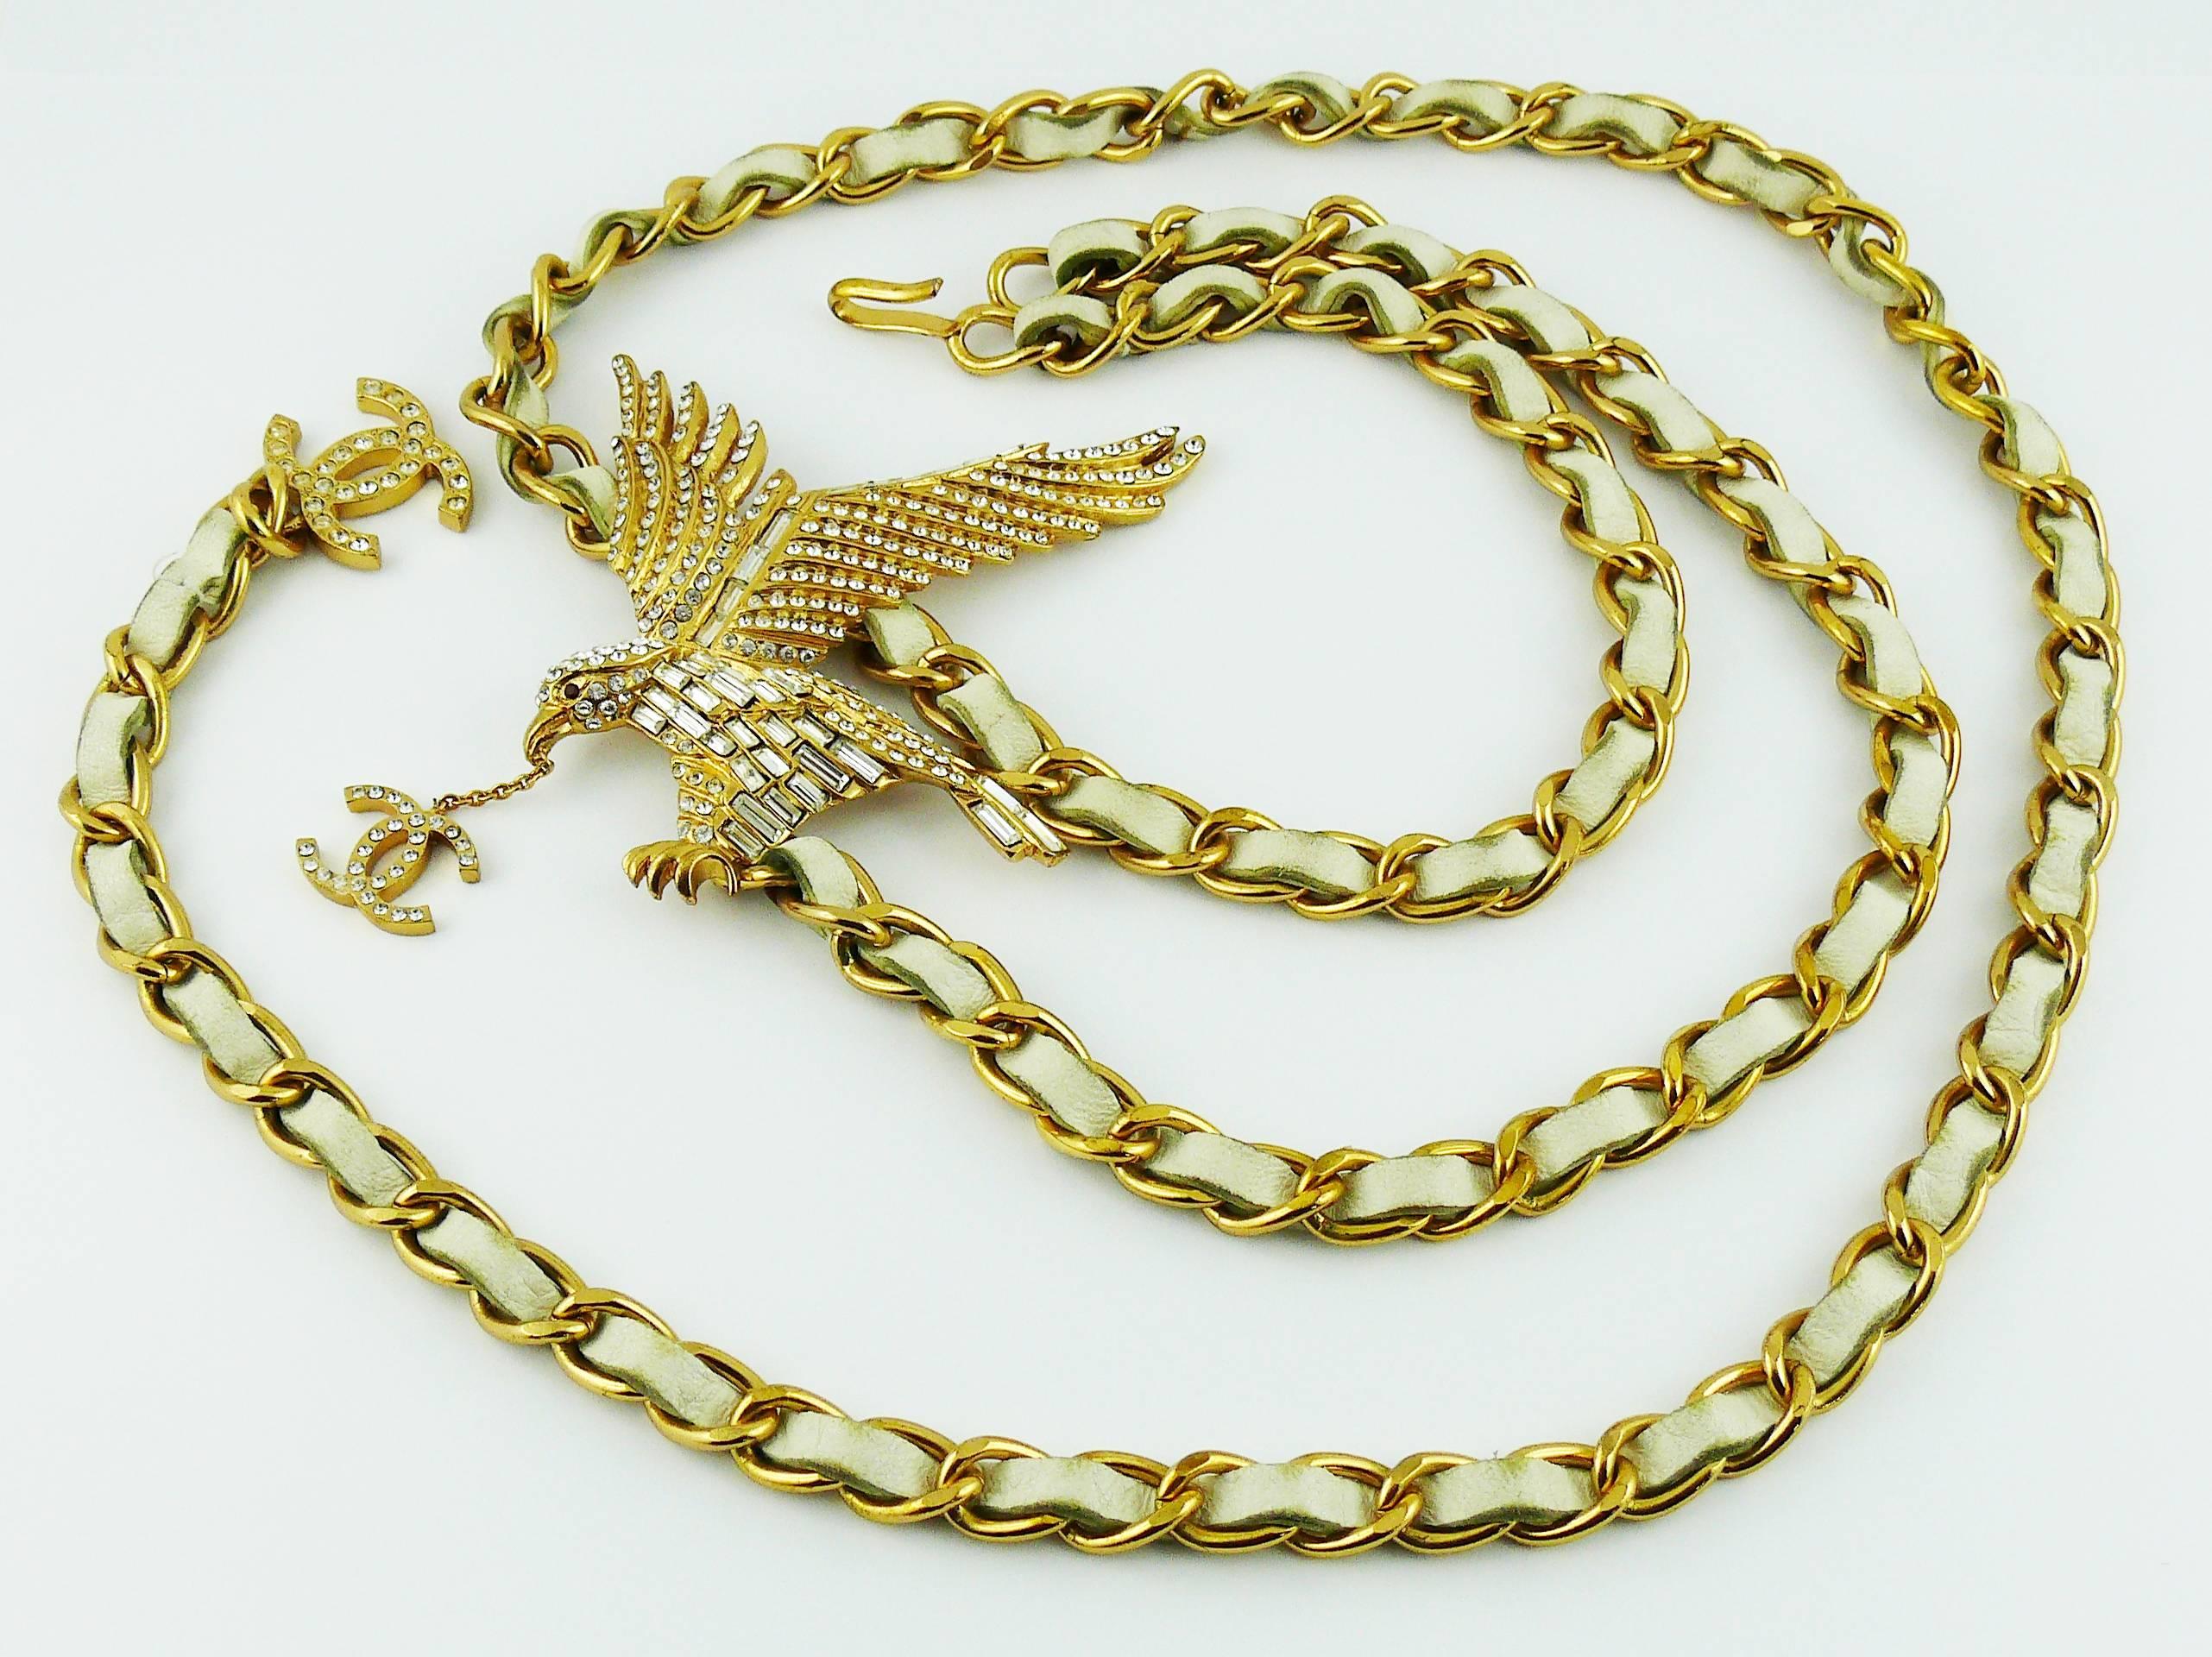 Women's Chanel Rare Jewelled Eagle White and Gold Runway Belt or Necklace